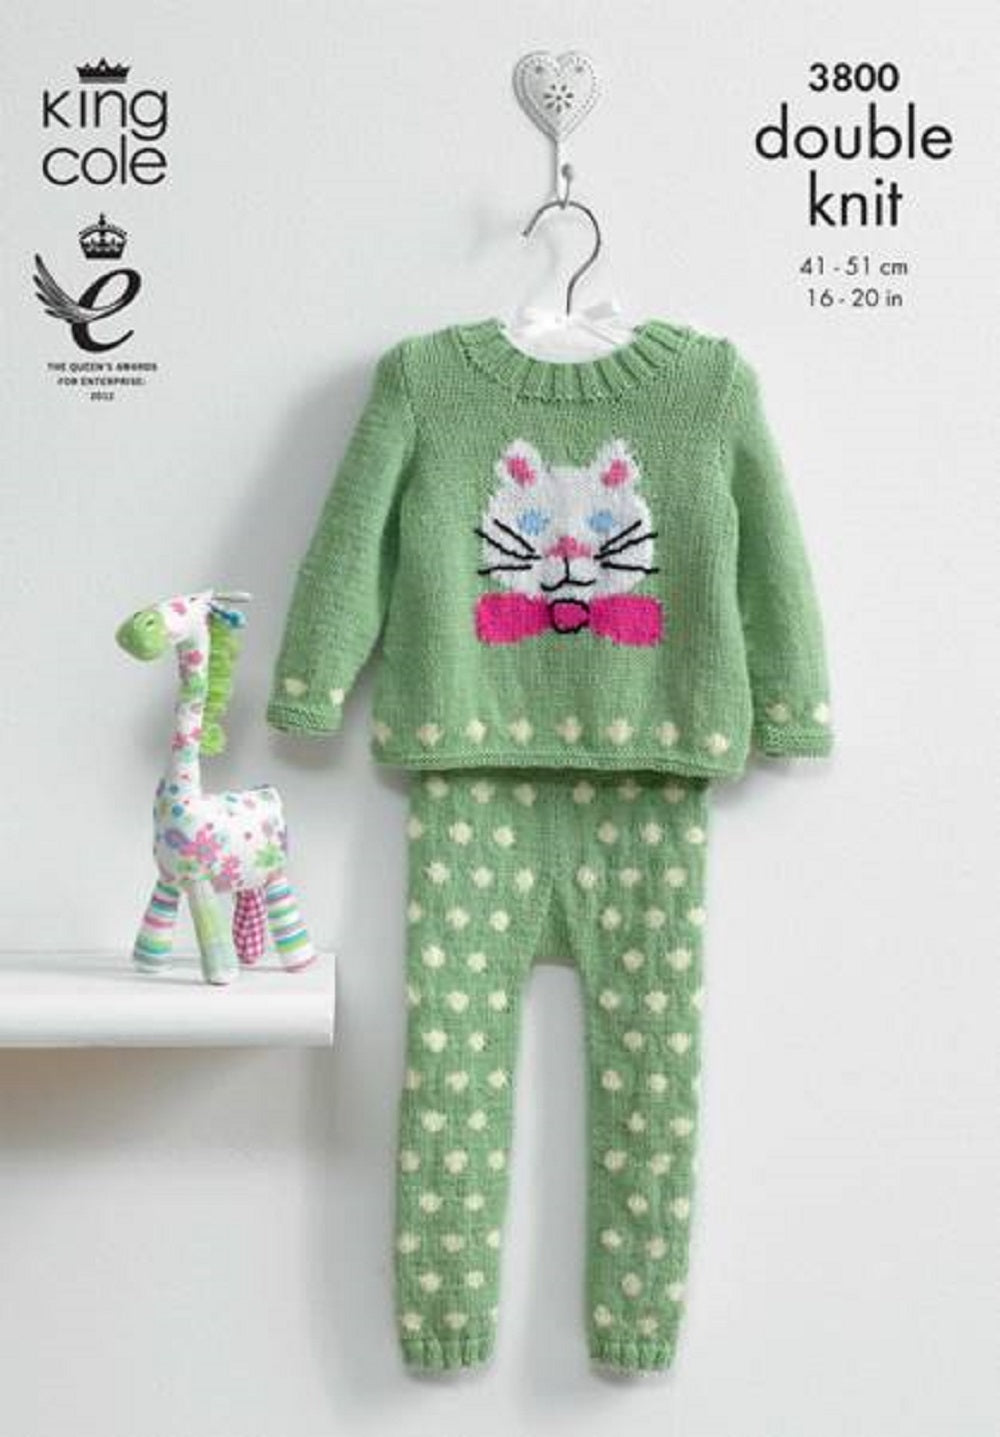 King Cole 3800 Childs Leggings Tunic Double knit Knitting Pattern